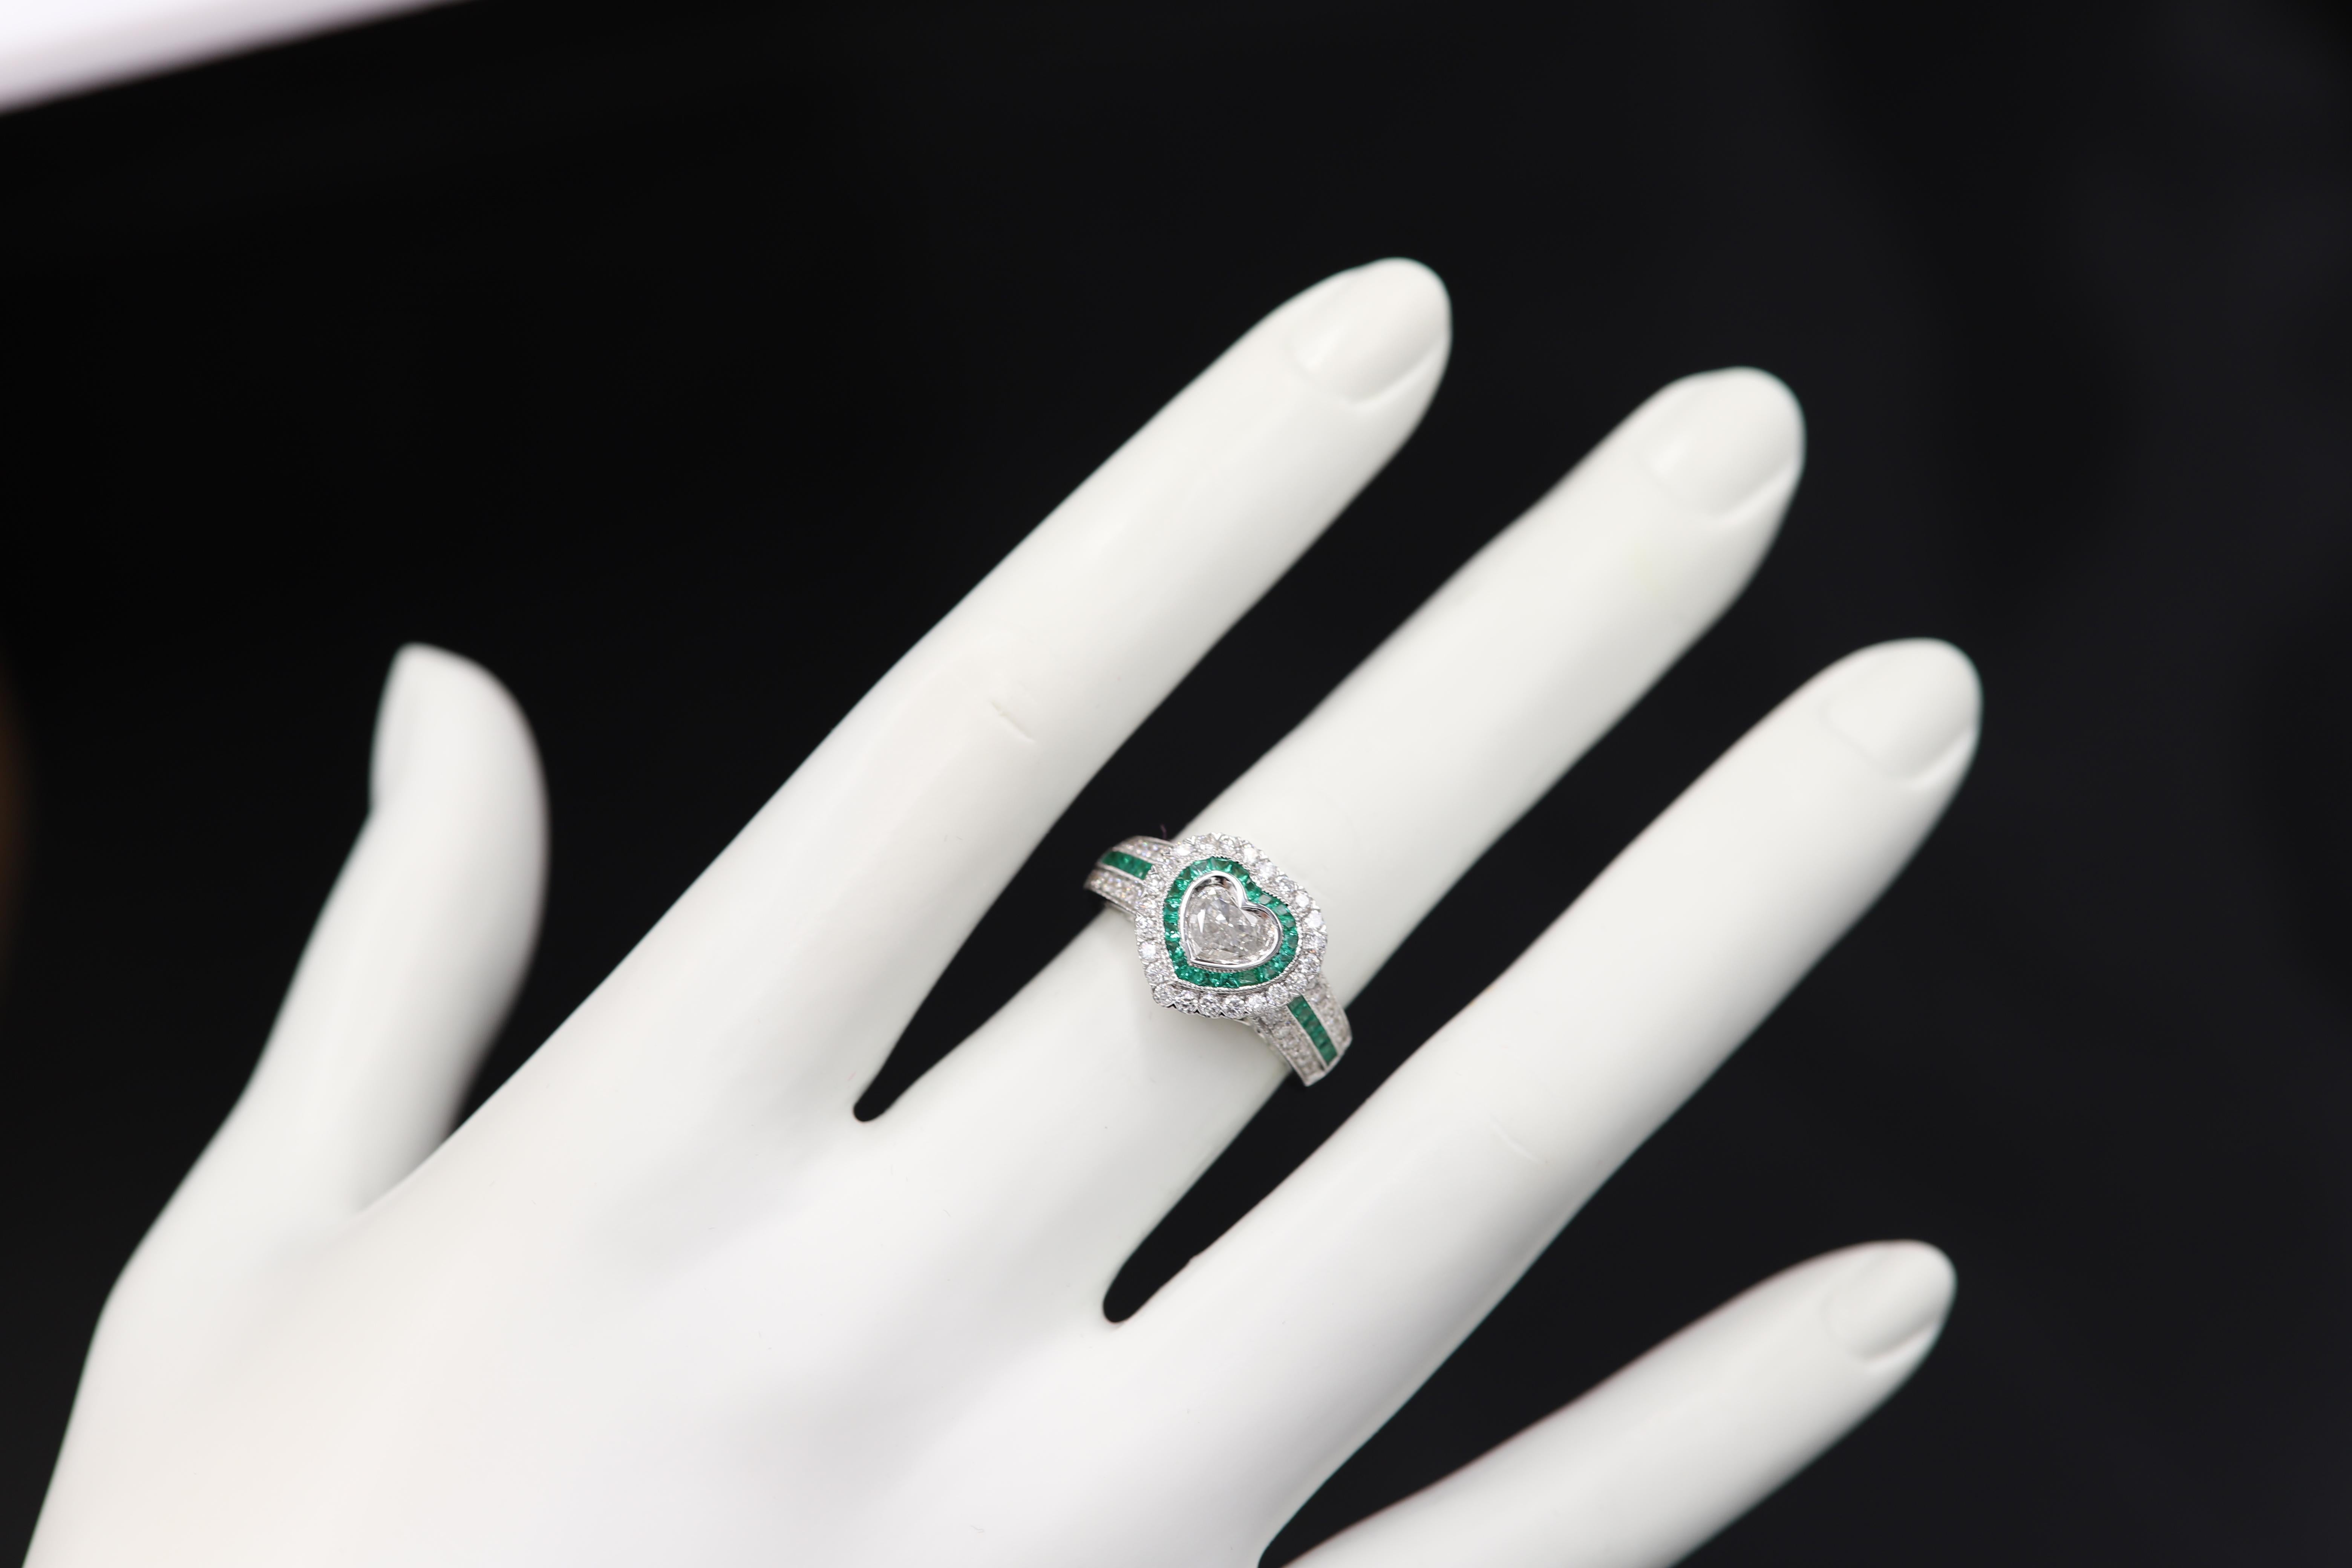 Brilliant Art Deco Style Ring Very special & unique, 18k White Gold 8.30 grams. Total all Diamonds 1.18 carat ( center stone is heart shape cut Diamond 0.44 carat IJ-I1 ) Emeralds total 0.71 carat. overall design area size on the top is, 13 mm.